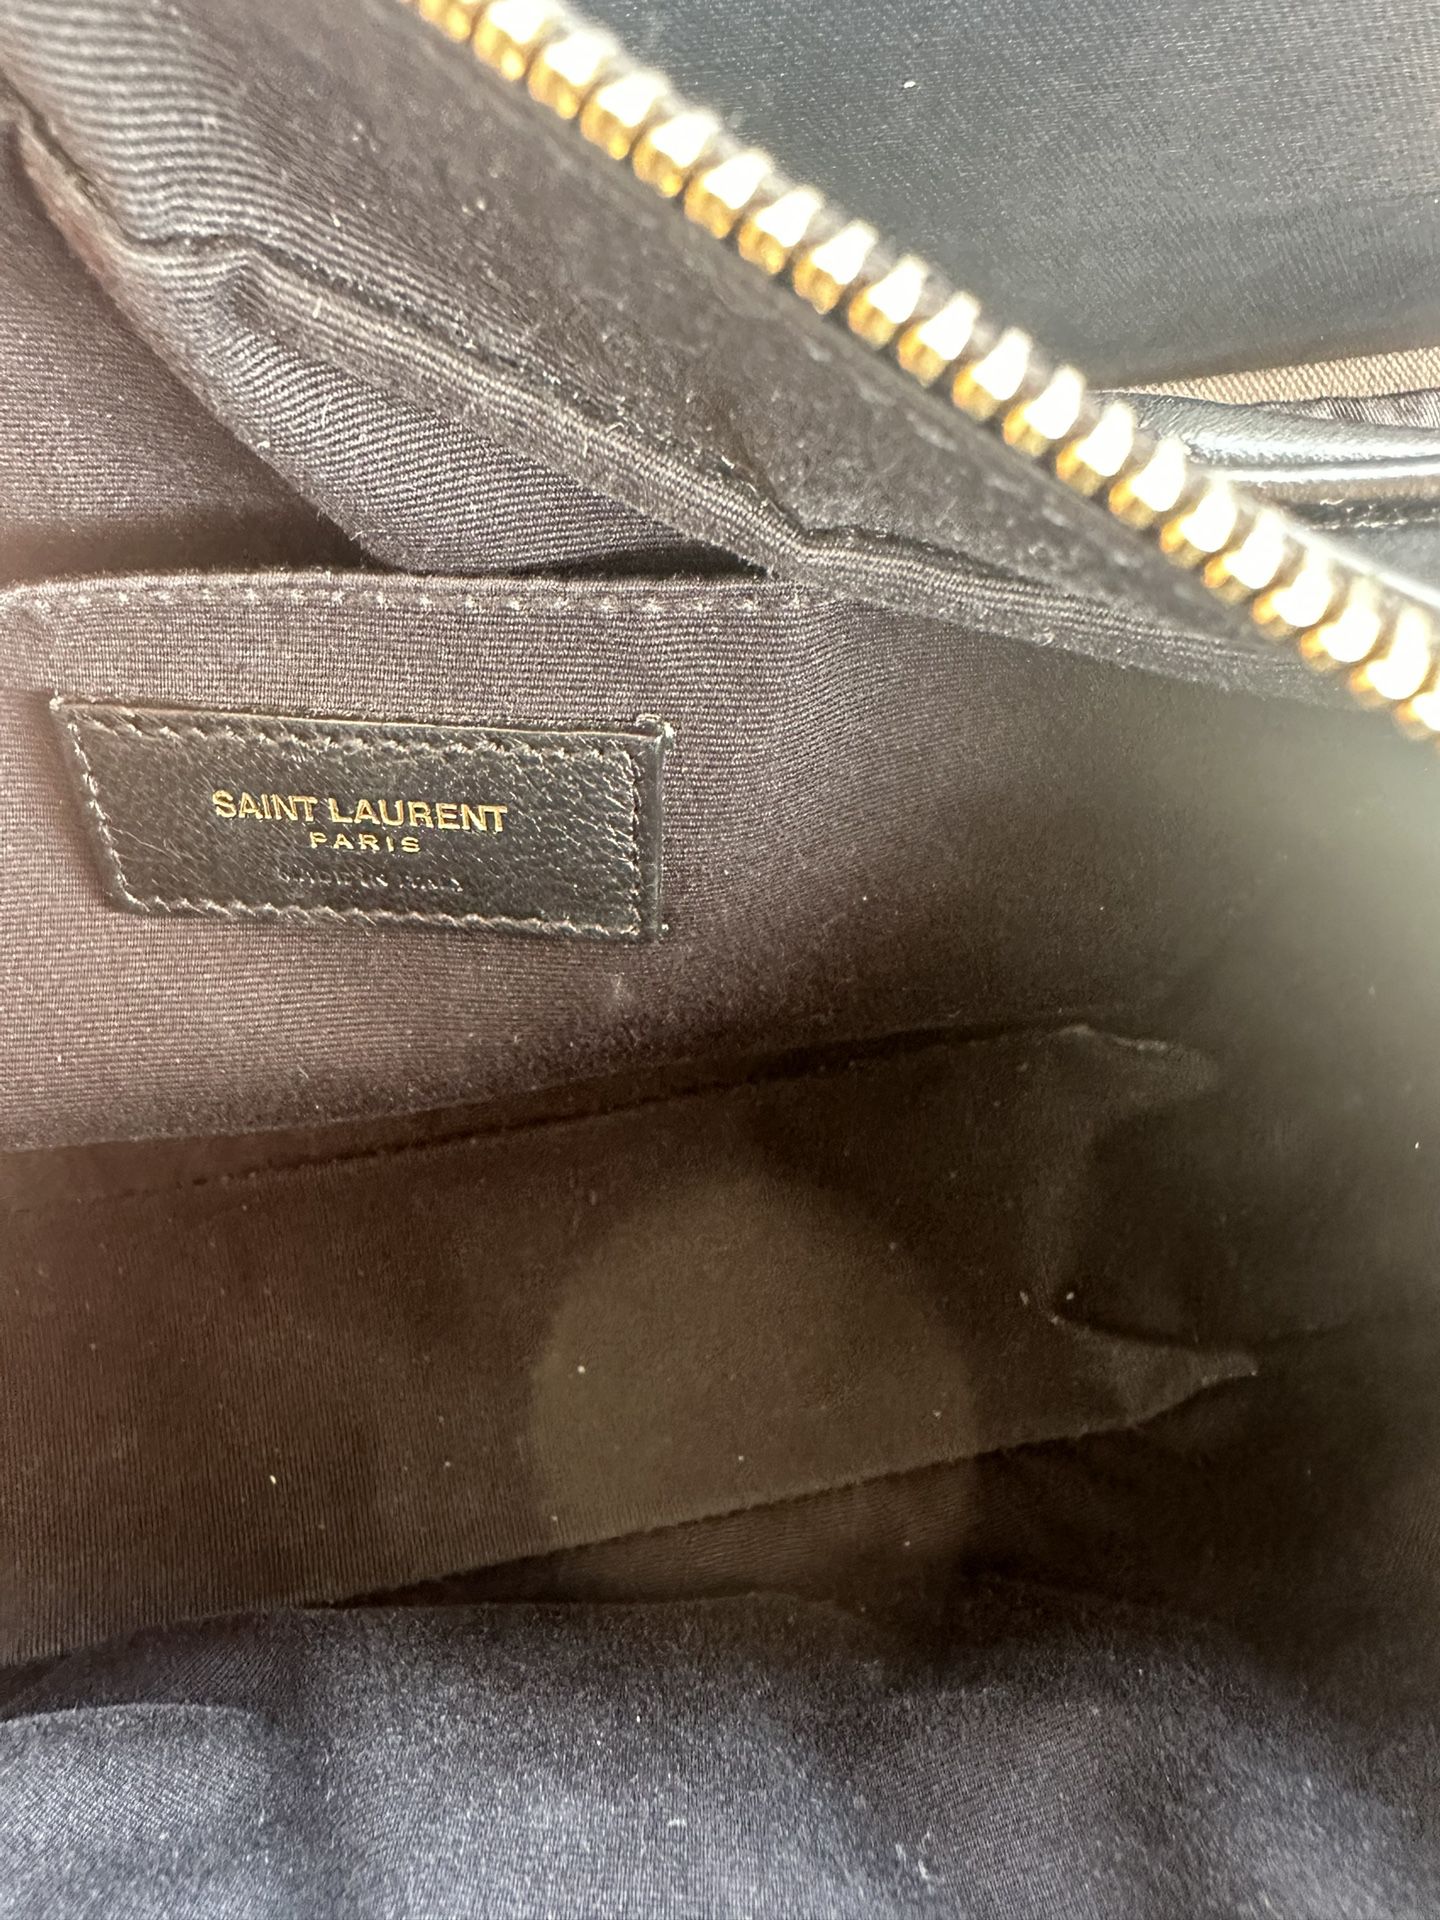 Authentic YSL Phyton Skin Bag for Sale in Lakeside, CA - OfferUp